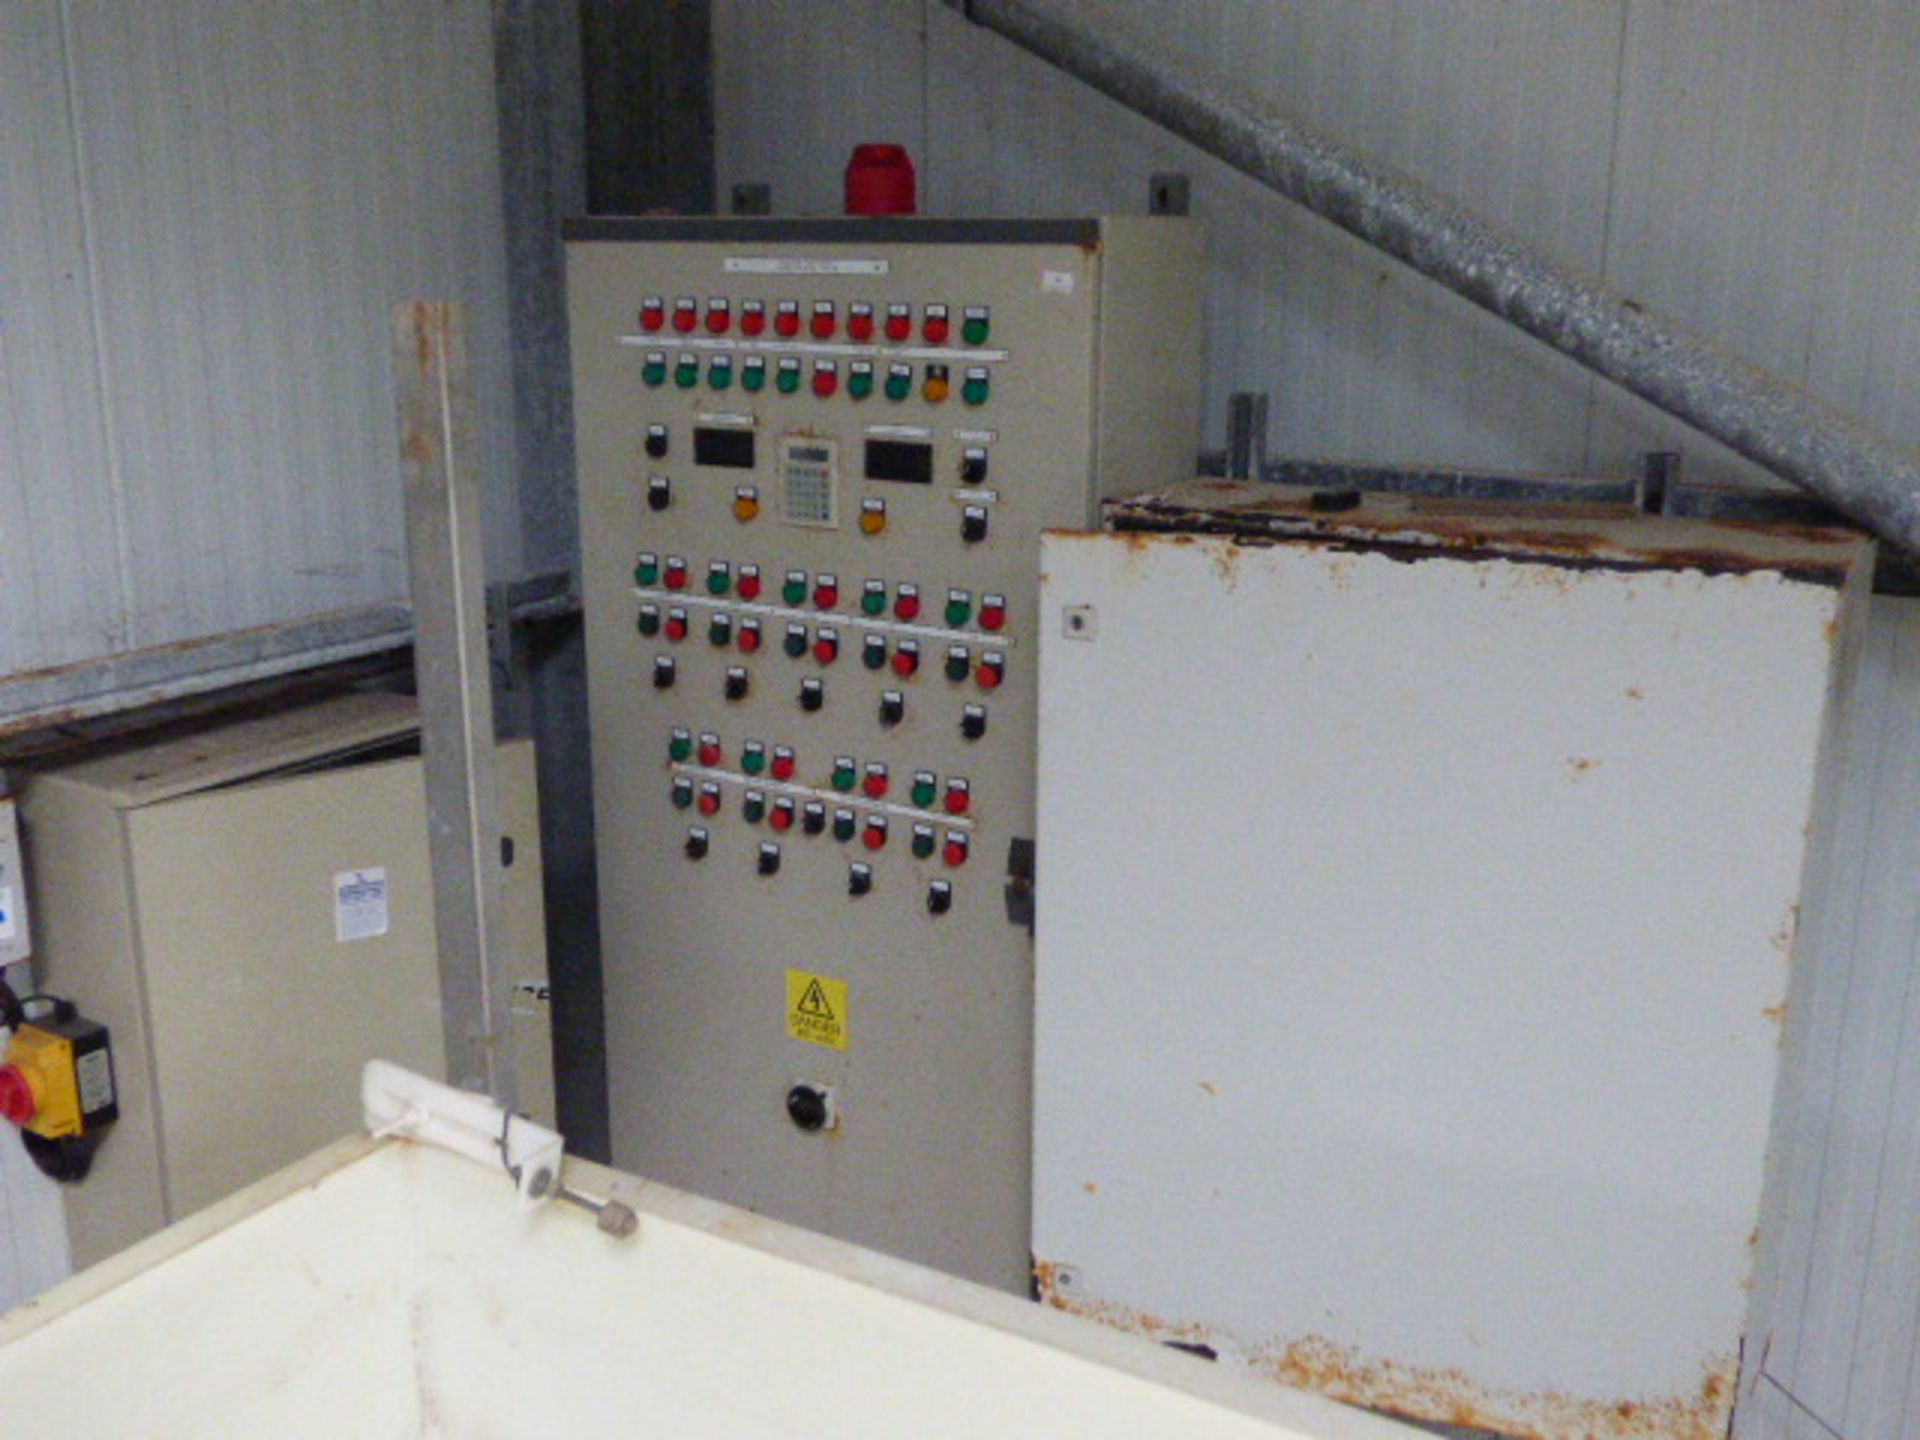 Suffolk Fish Farm Turbot Rearing System Control Panels - Image 2 of 4